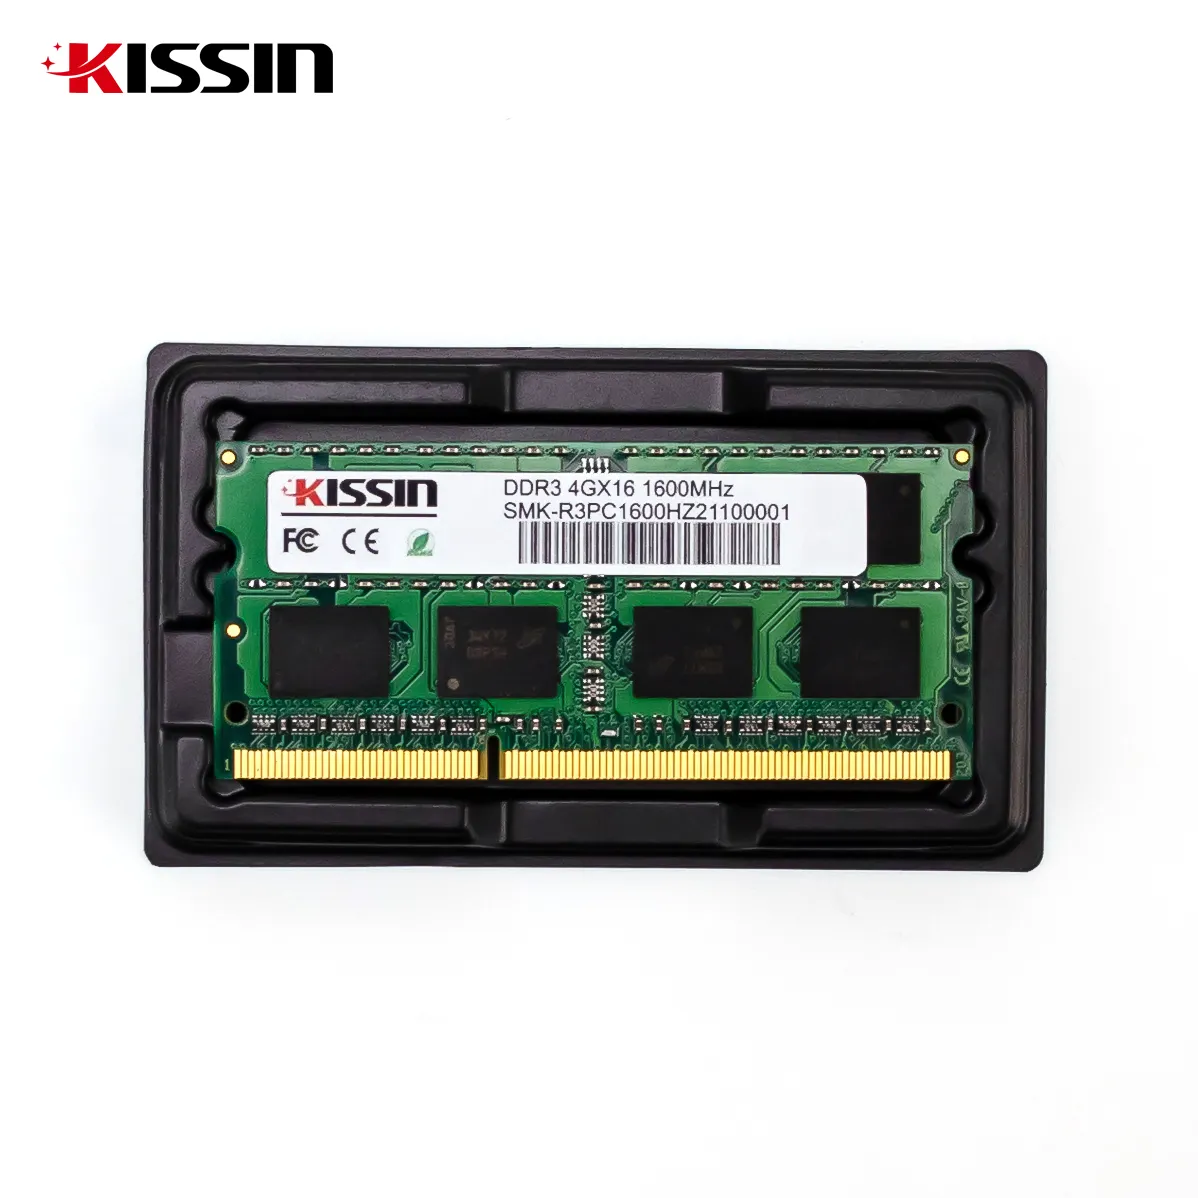 4GB 8GB 16GB DDR3 1600MHz Laptop Ram Memory Compatible with All Original Packing Motherboard Card RAM